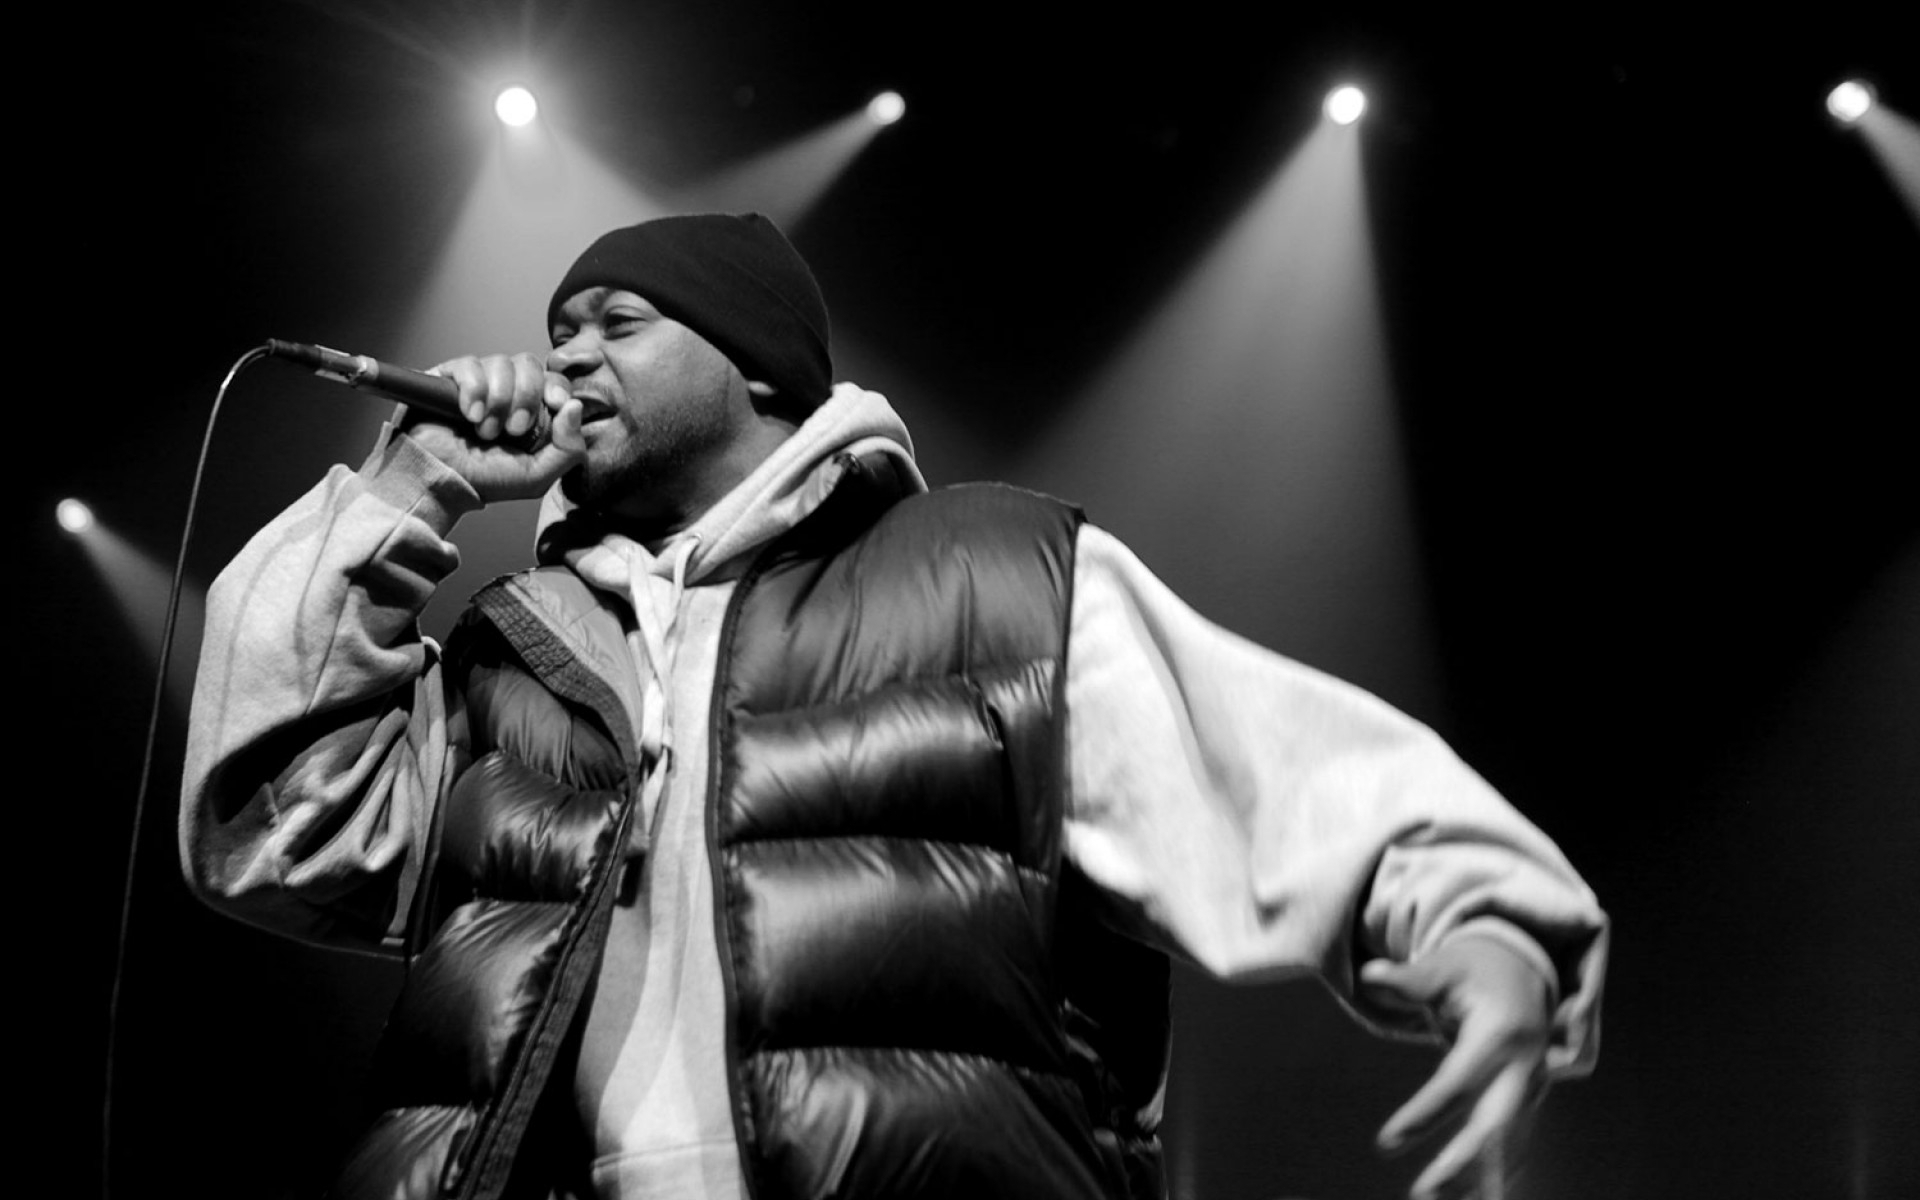 Ghostface Killah Wallpaper Image Photos Pictures Background